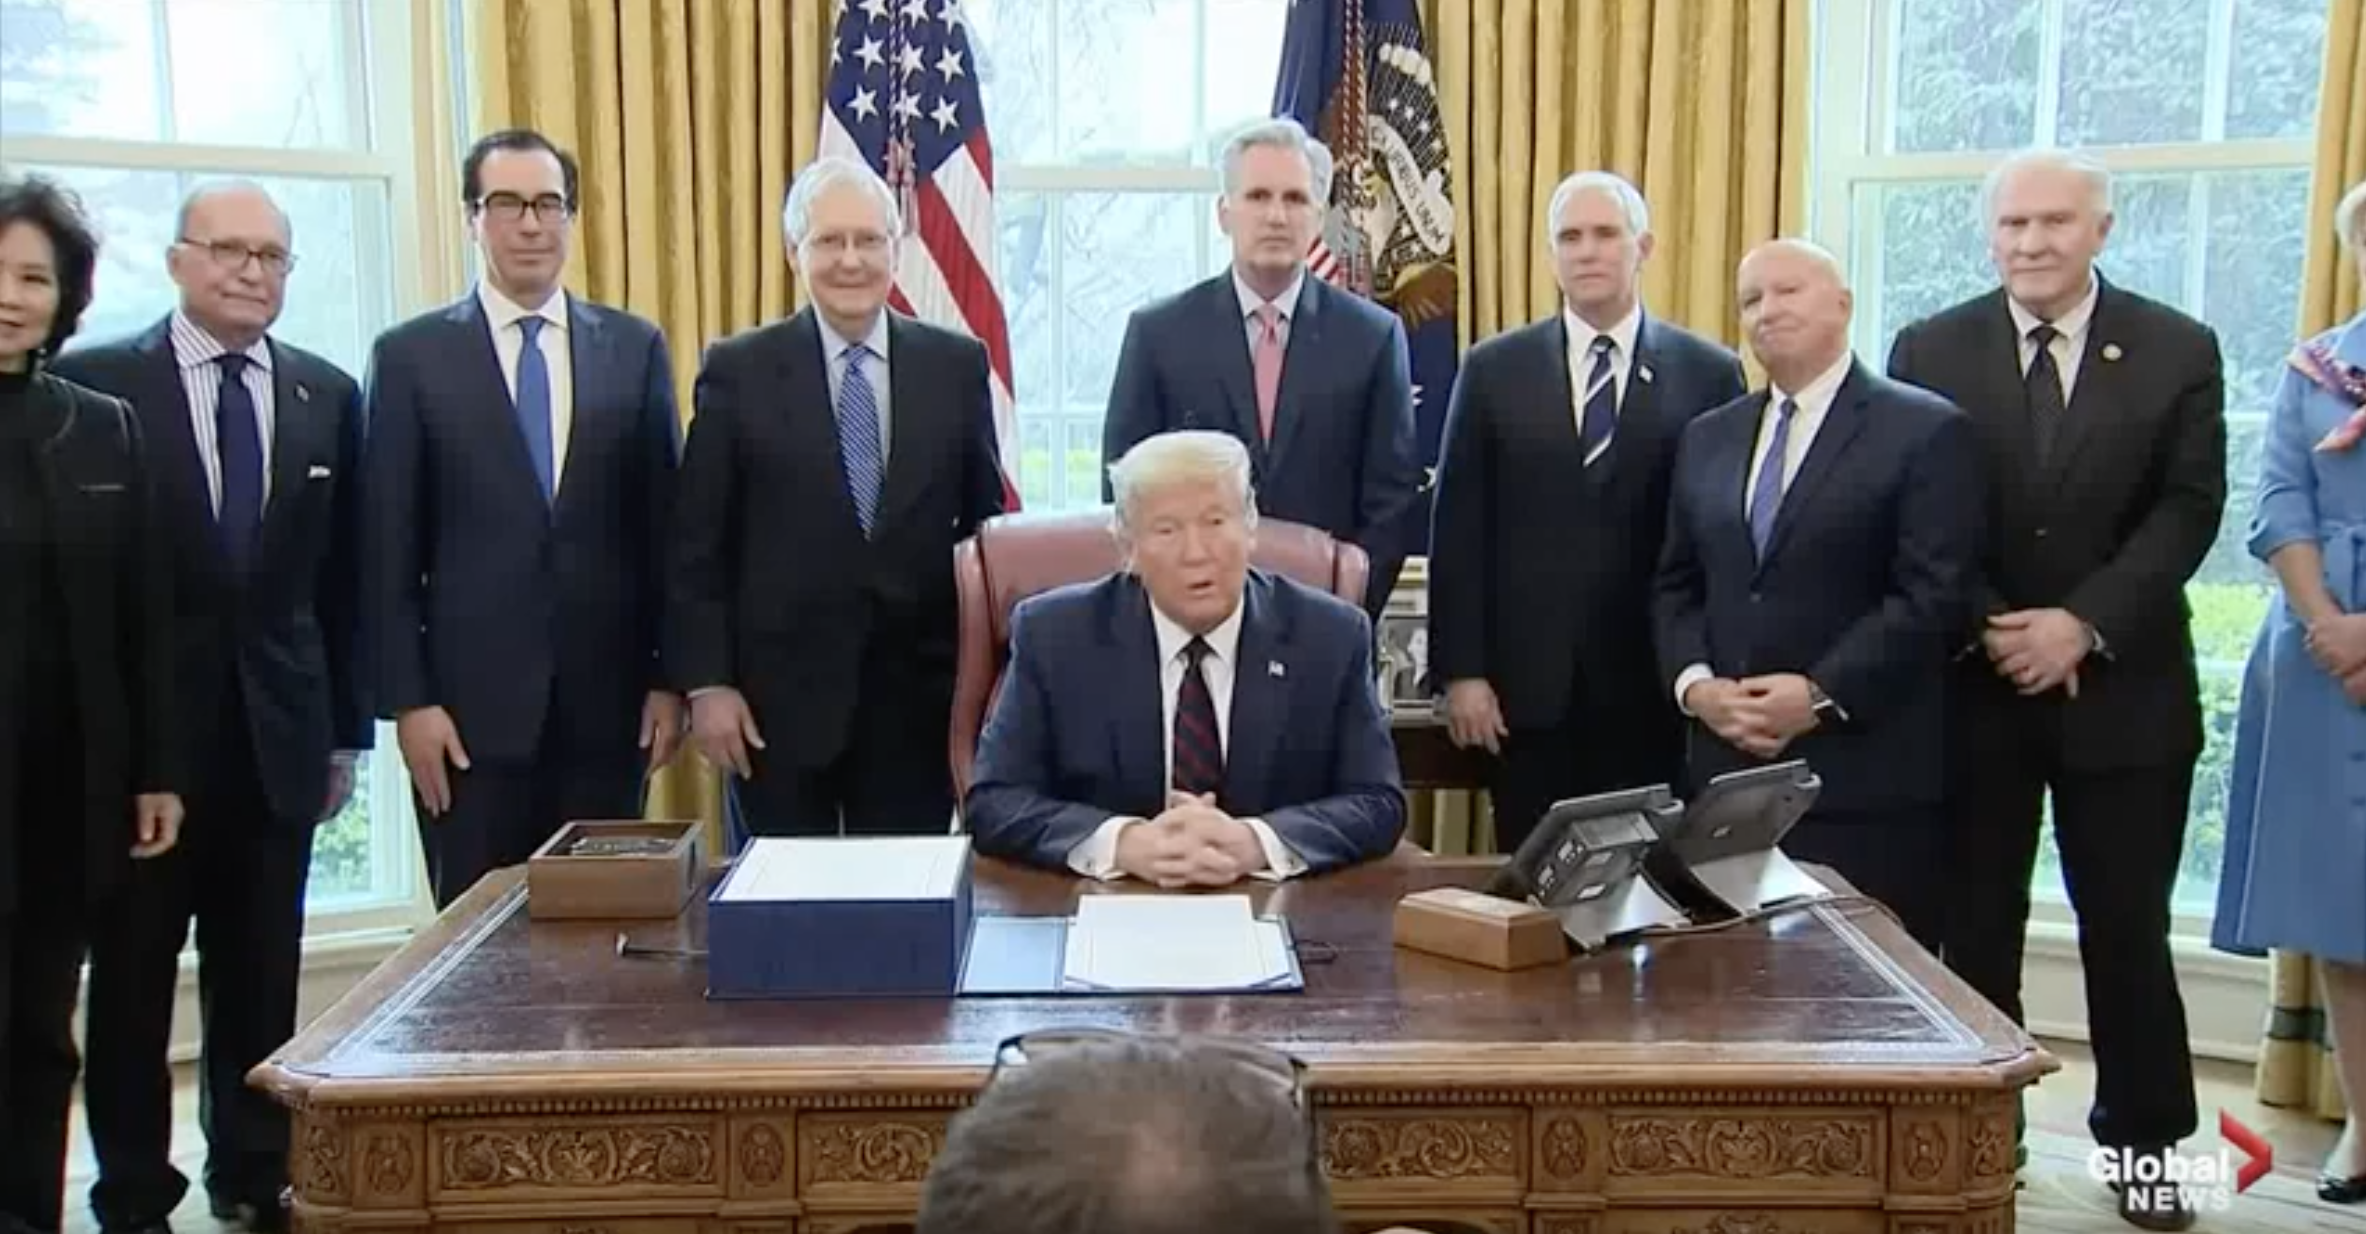 Signing of the CARES Act on 3/6/2020.